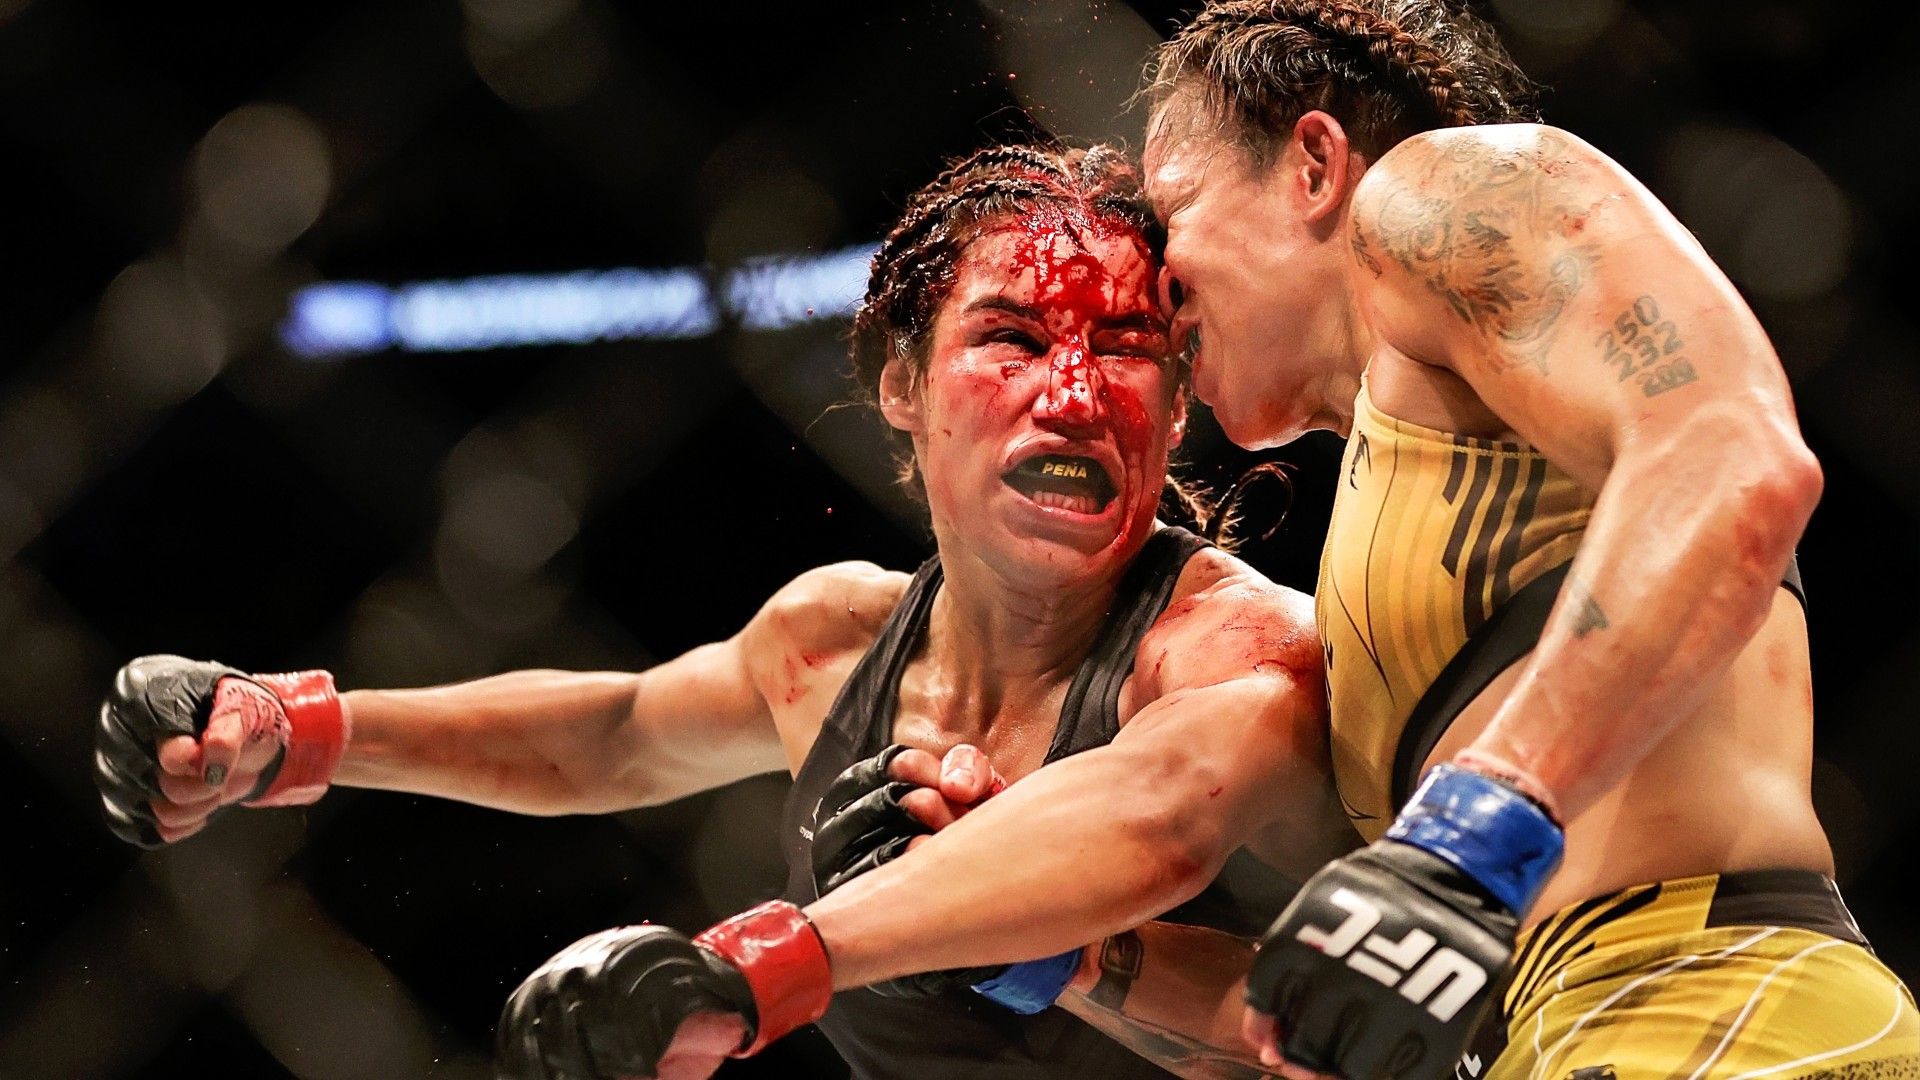 Amanda Nunes of Brazil exchanges strikes with Julianna Pena in their bantamweight title bout during UFC 277 